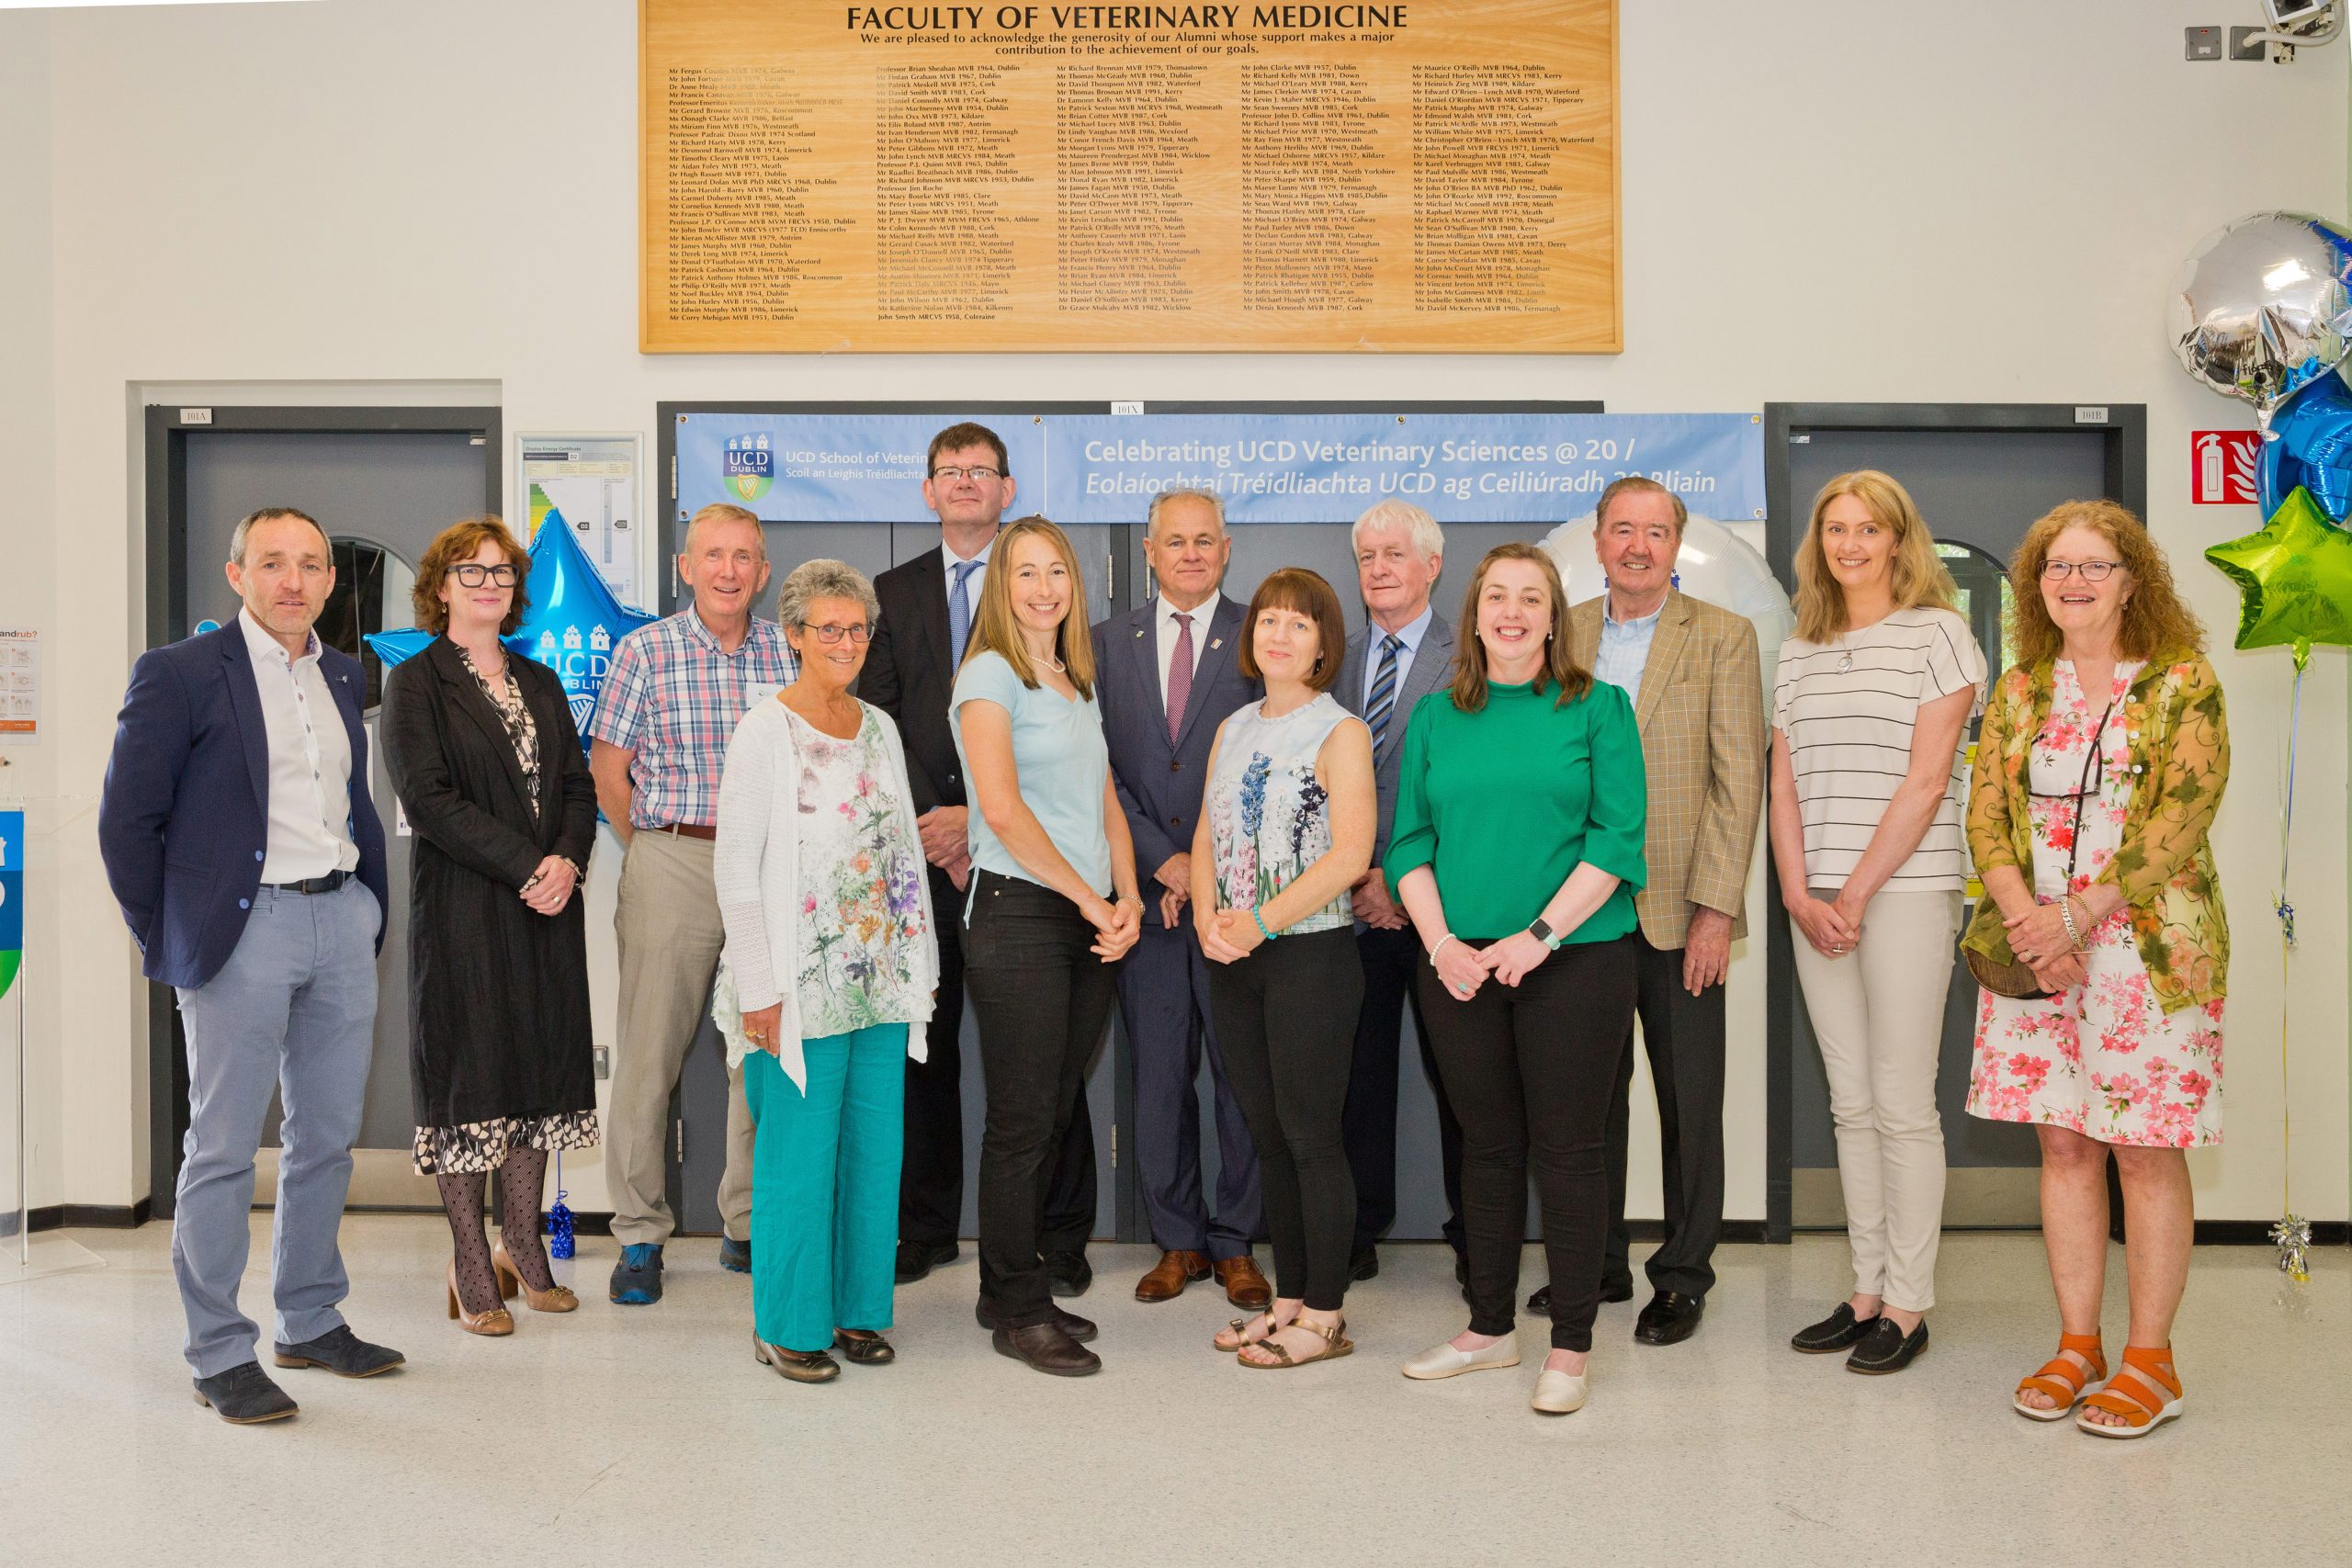 UCD vet school celebrates 20 years at campus with alumni wall